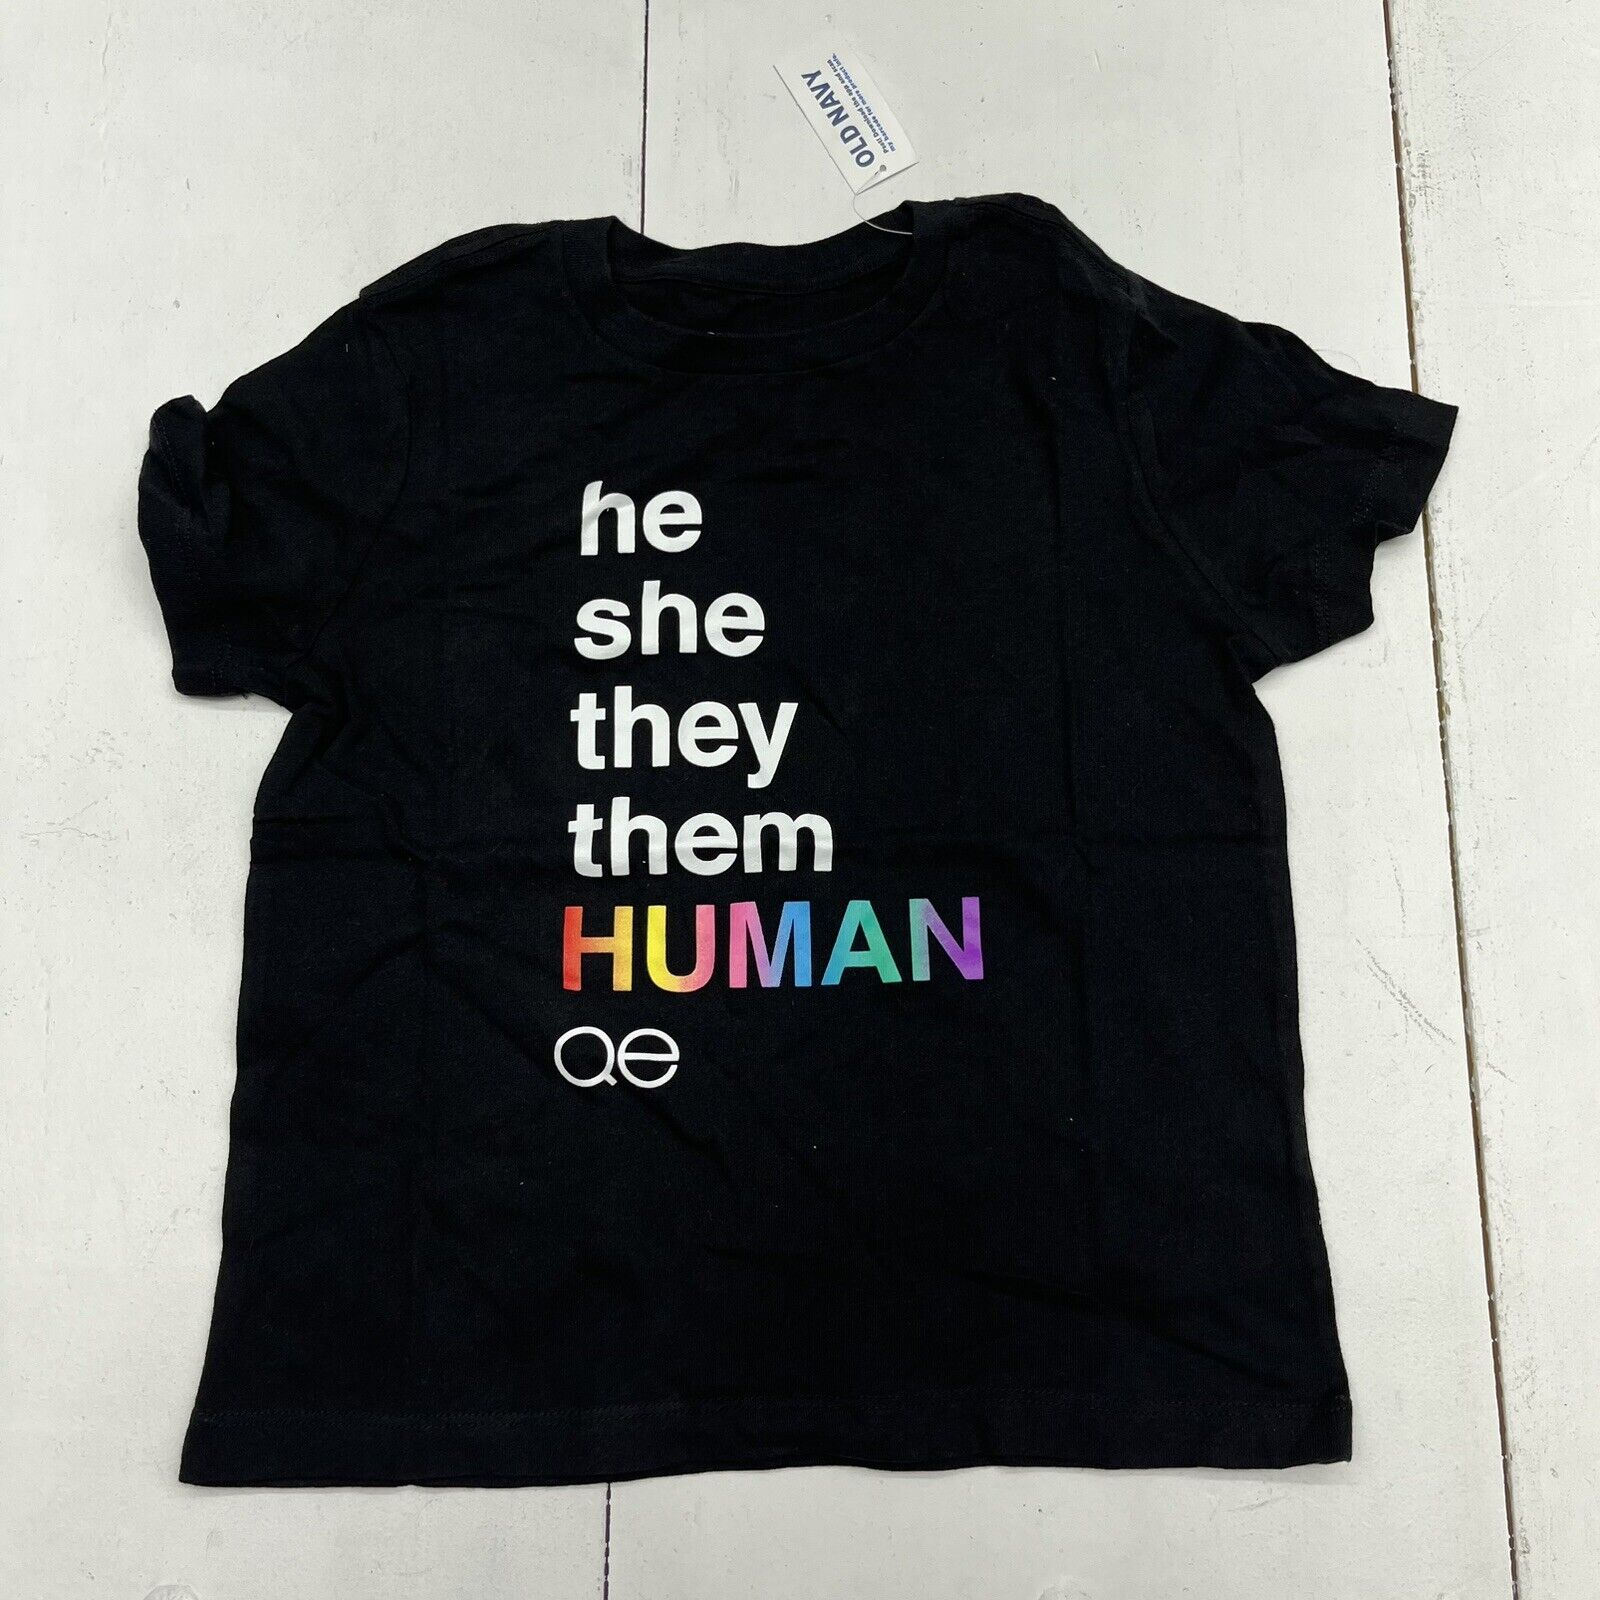 Old Navy Black “He, She, They, Them, Human, QE” T-Shirt Kids Size XS (5) NEW